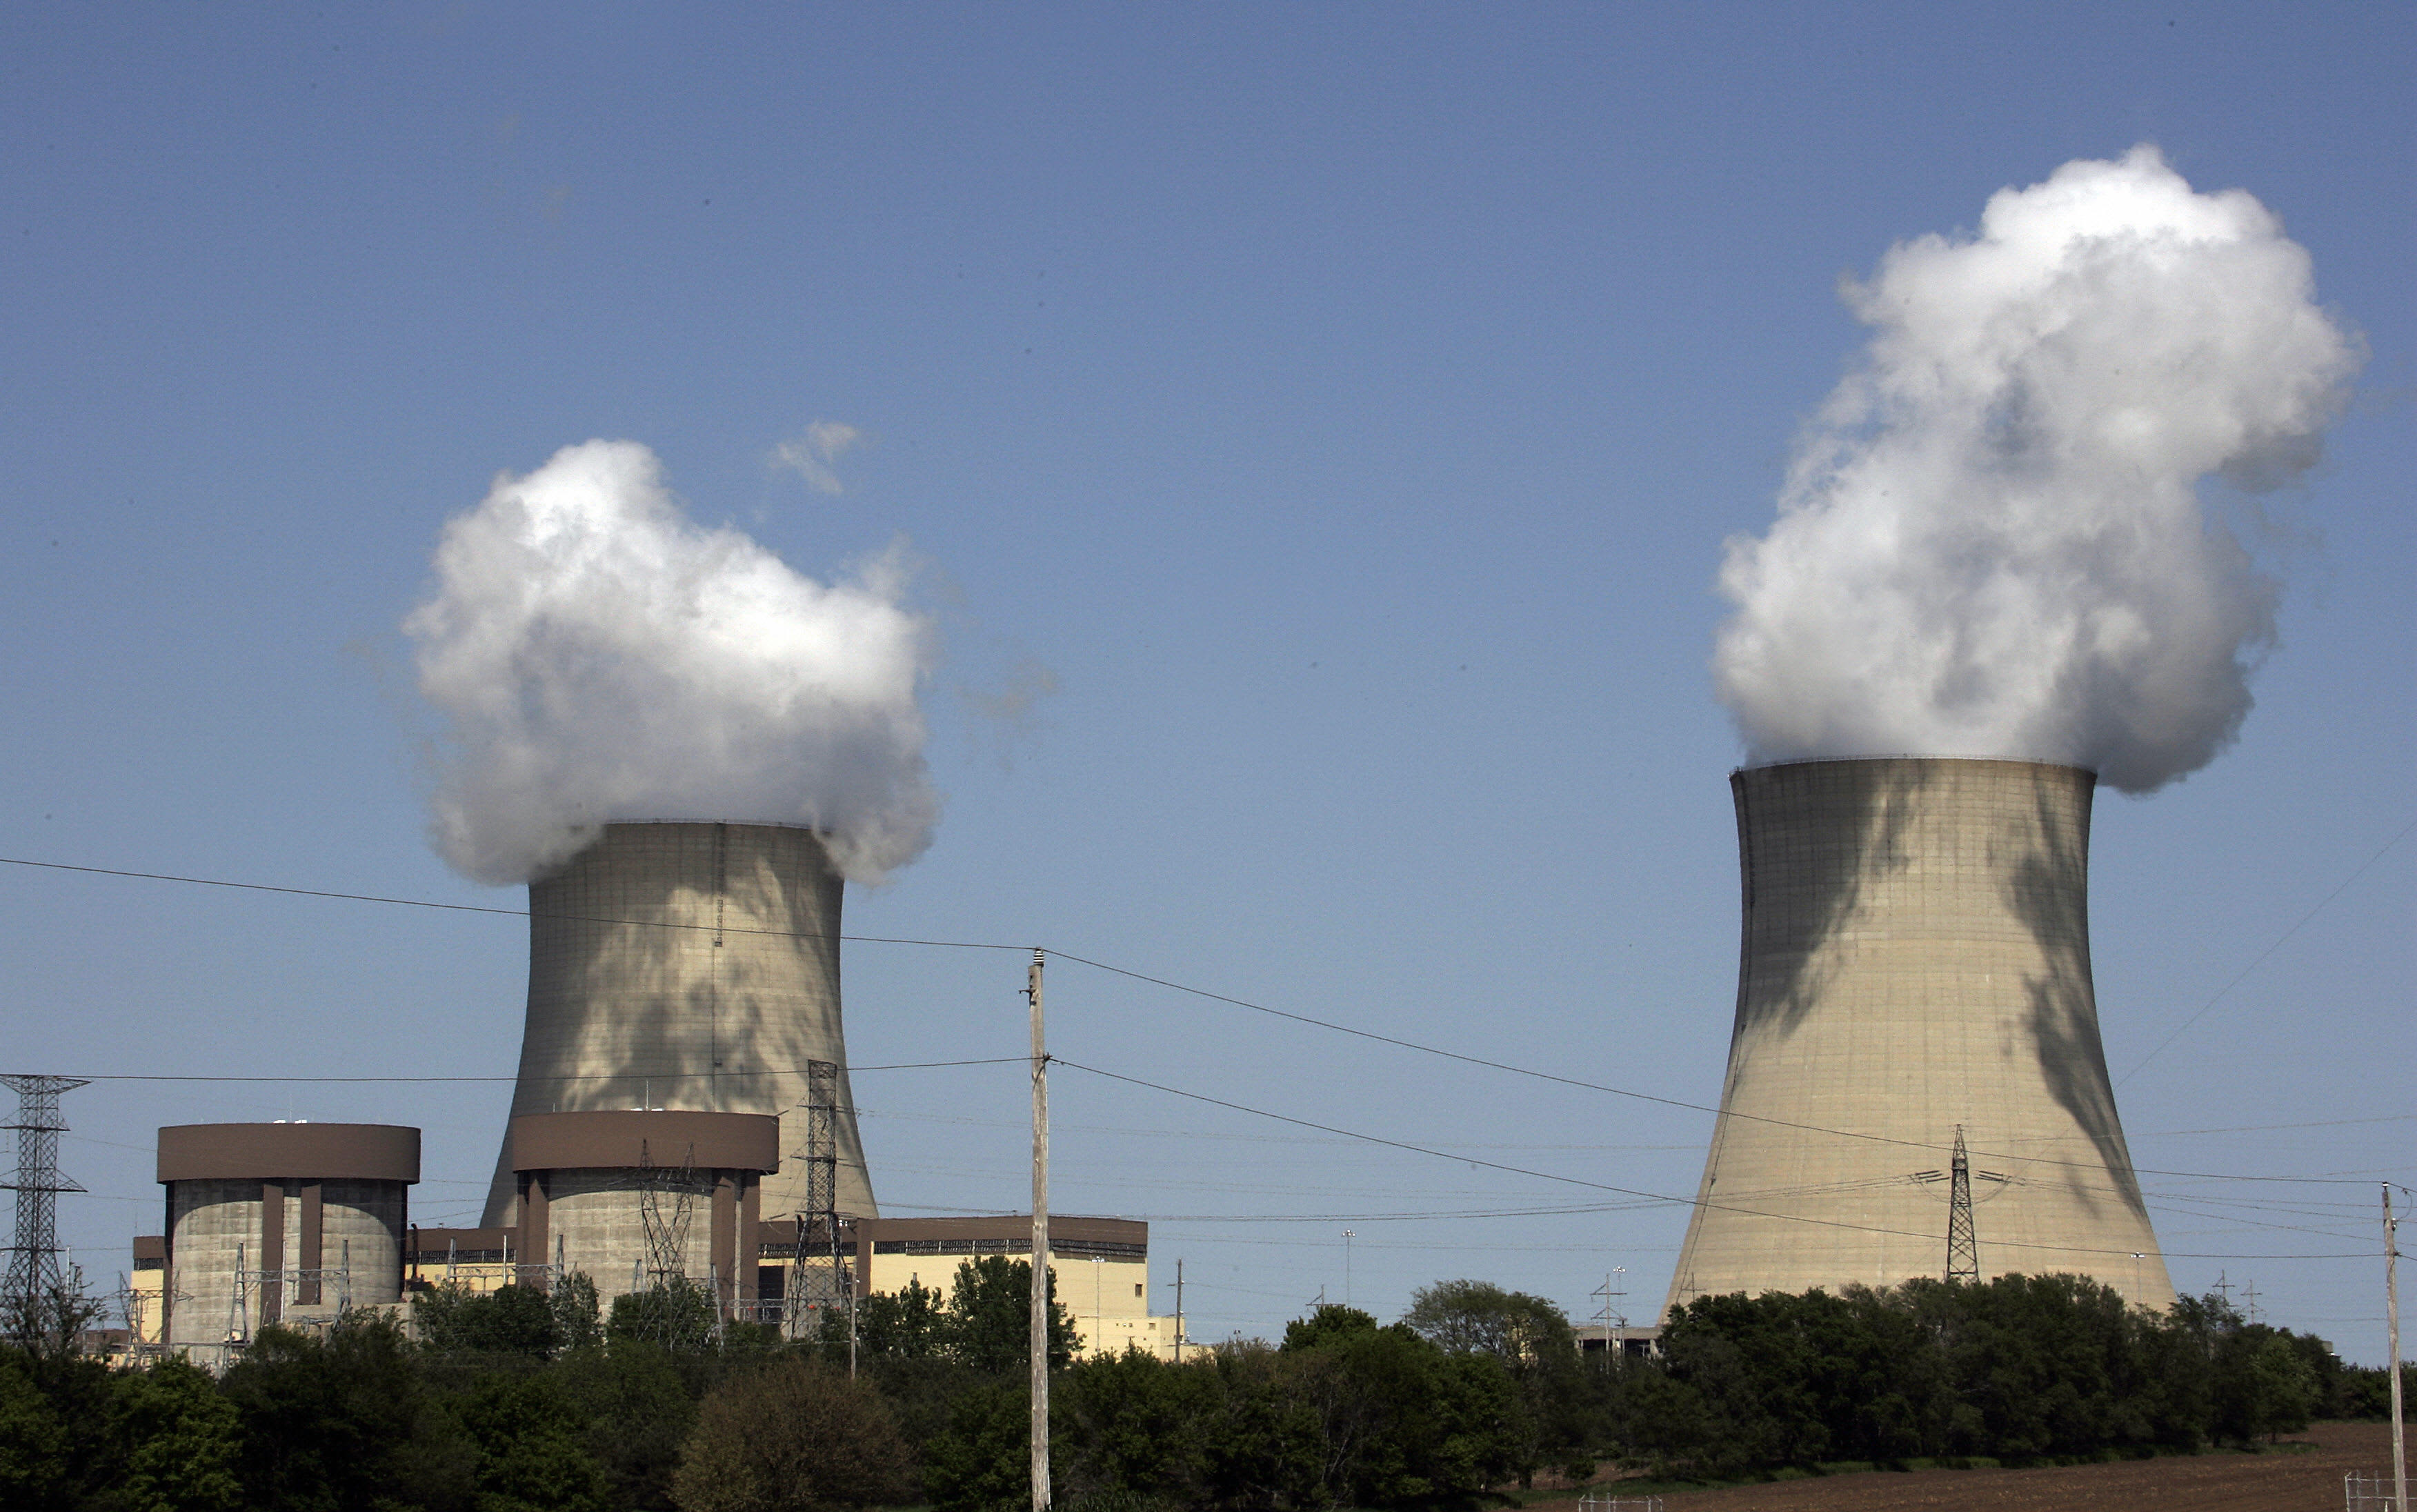 Goldman initiates energy generation company at buy, says nuclear exposure could boost stock